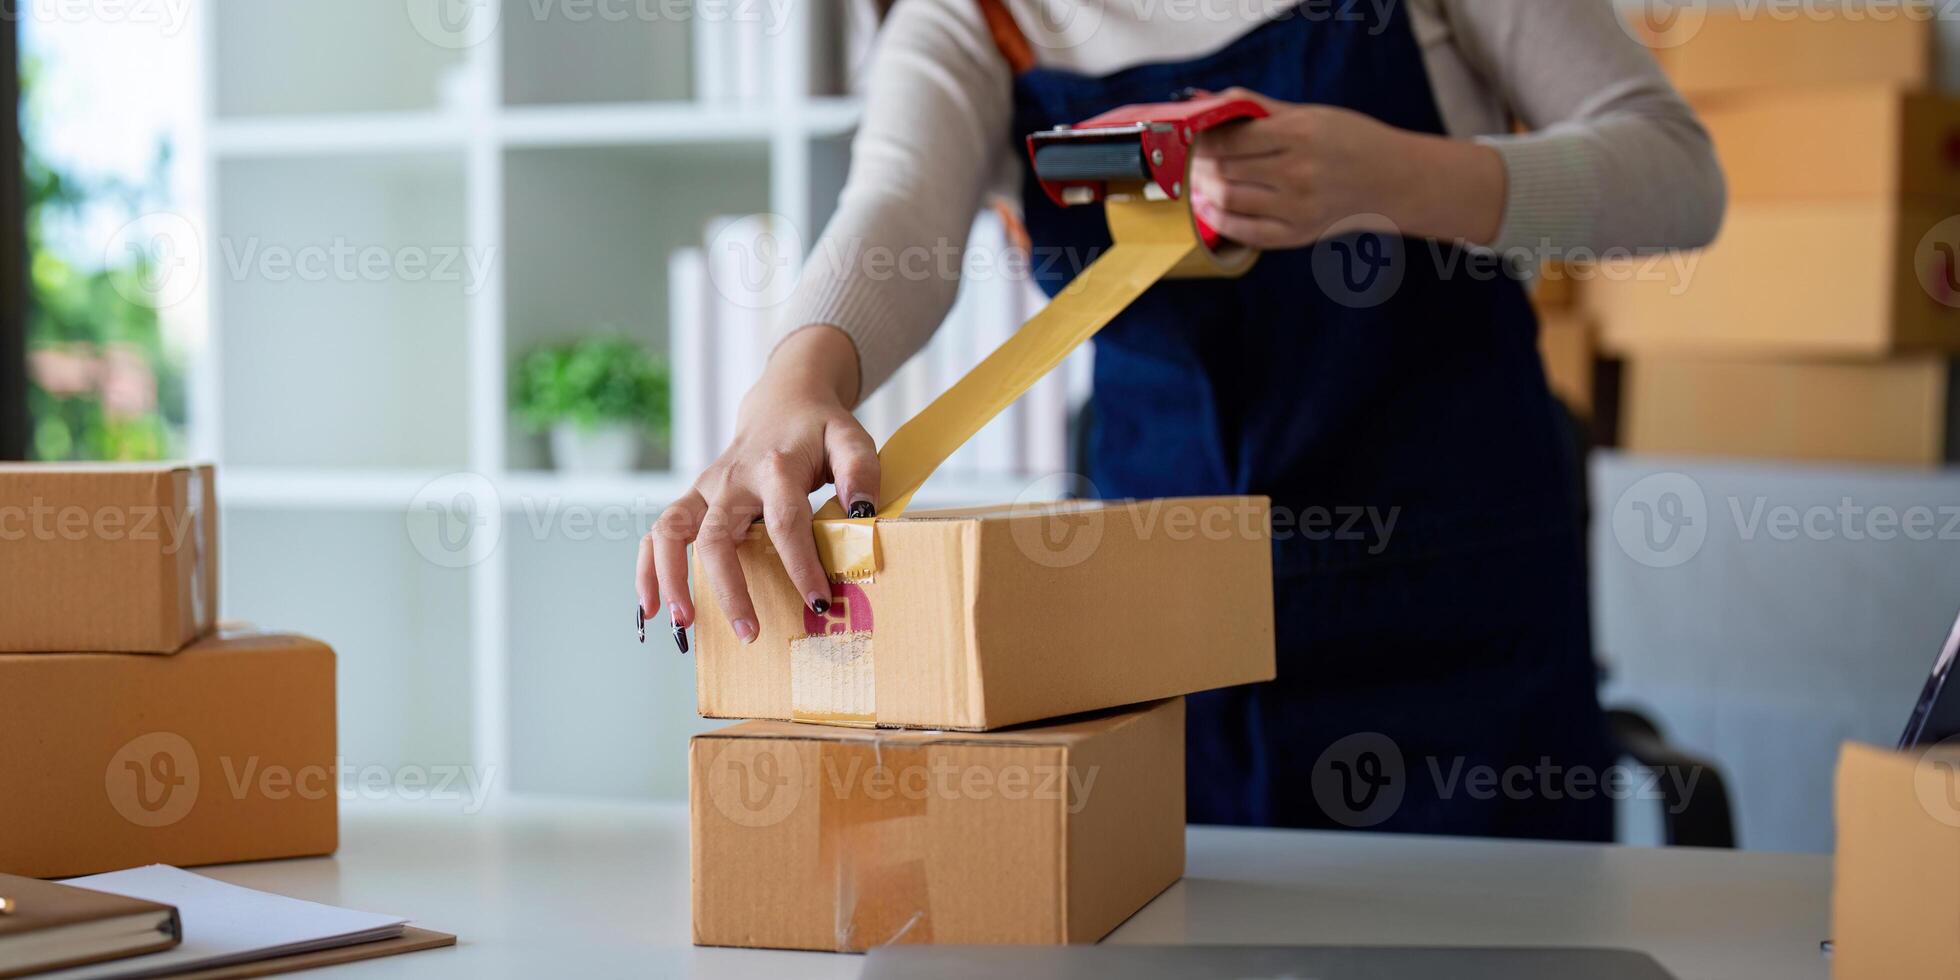 Woman use scotch tape to attach parcel box to prepare goods for the process of packaging, shipping, online sale internet marketing ecommerce concept startup business idea photo